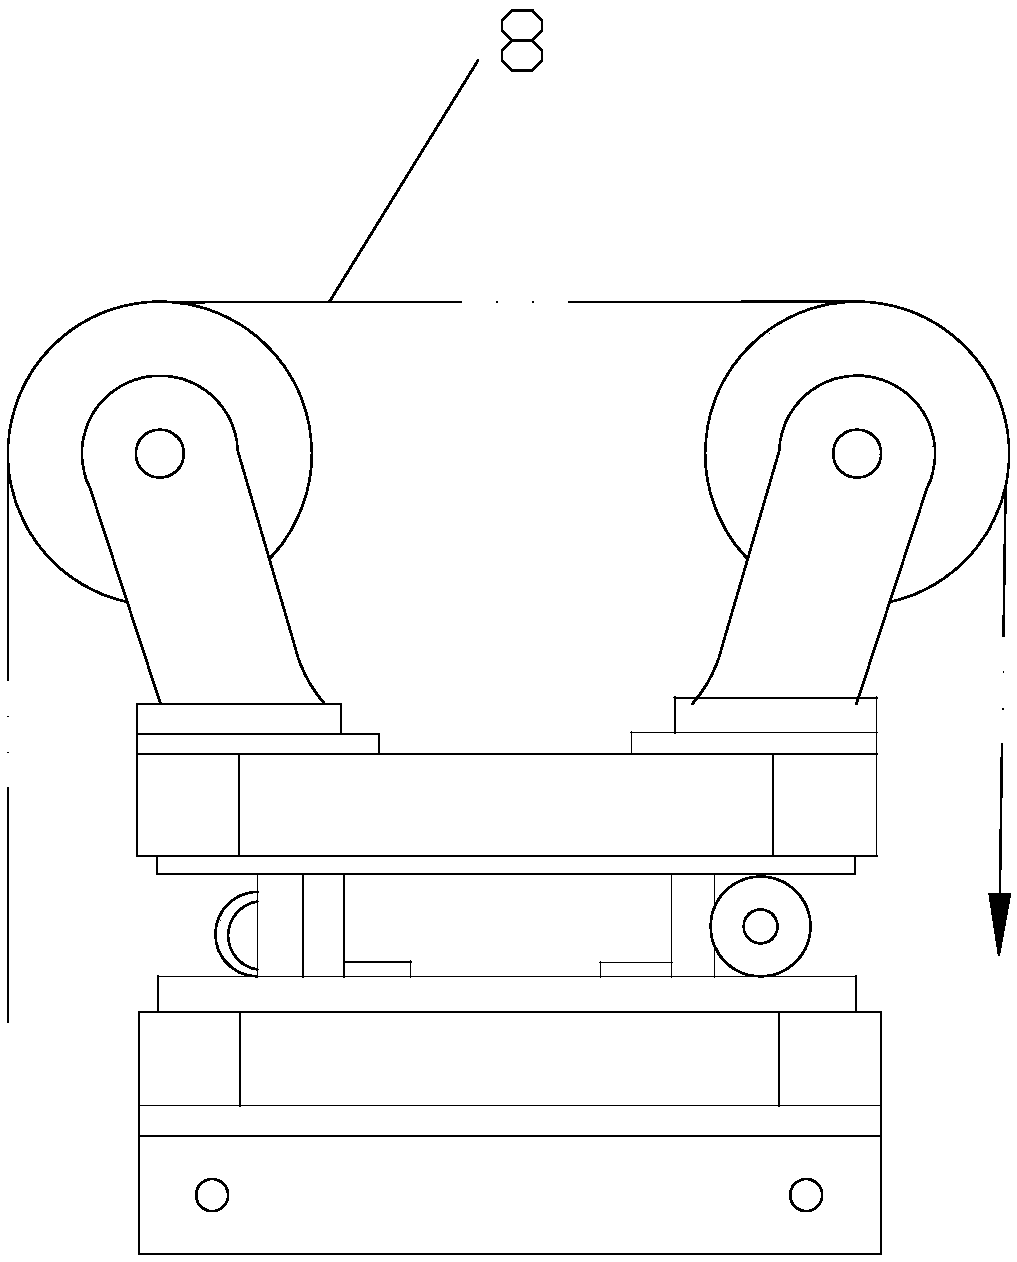 Deviation rectification device for material rolling